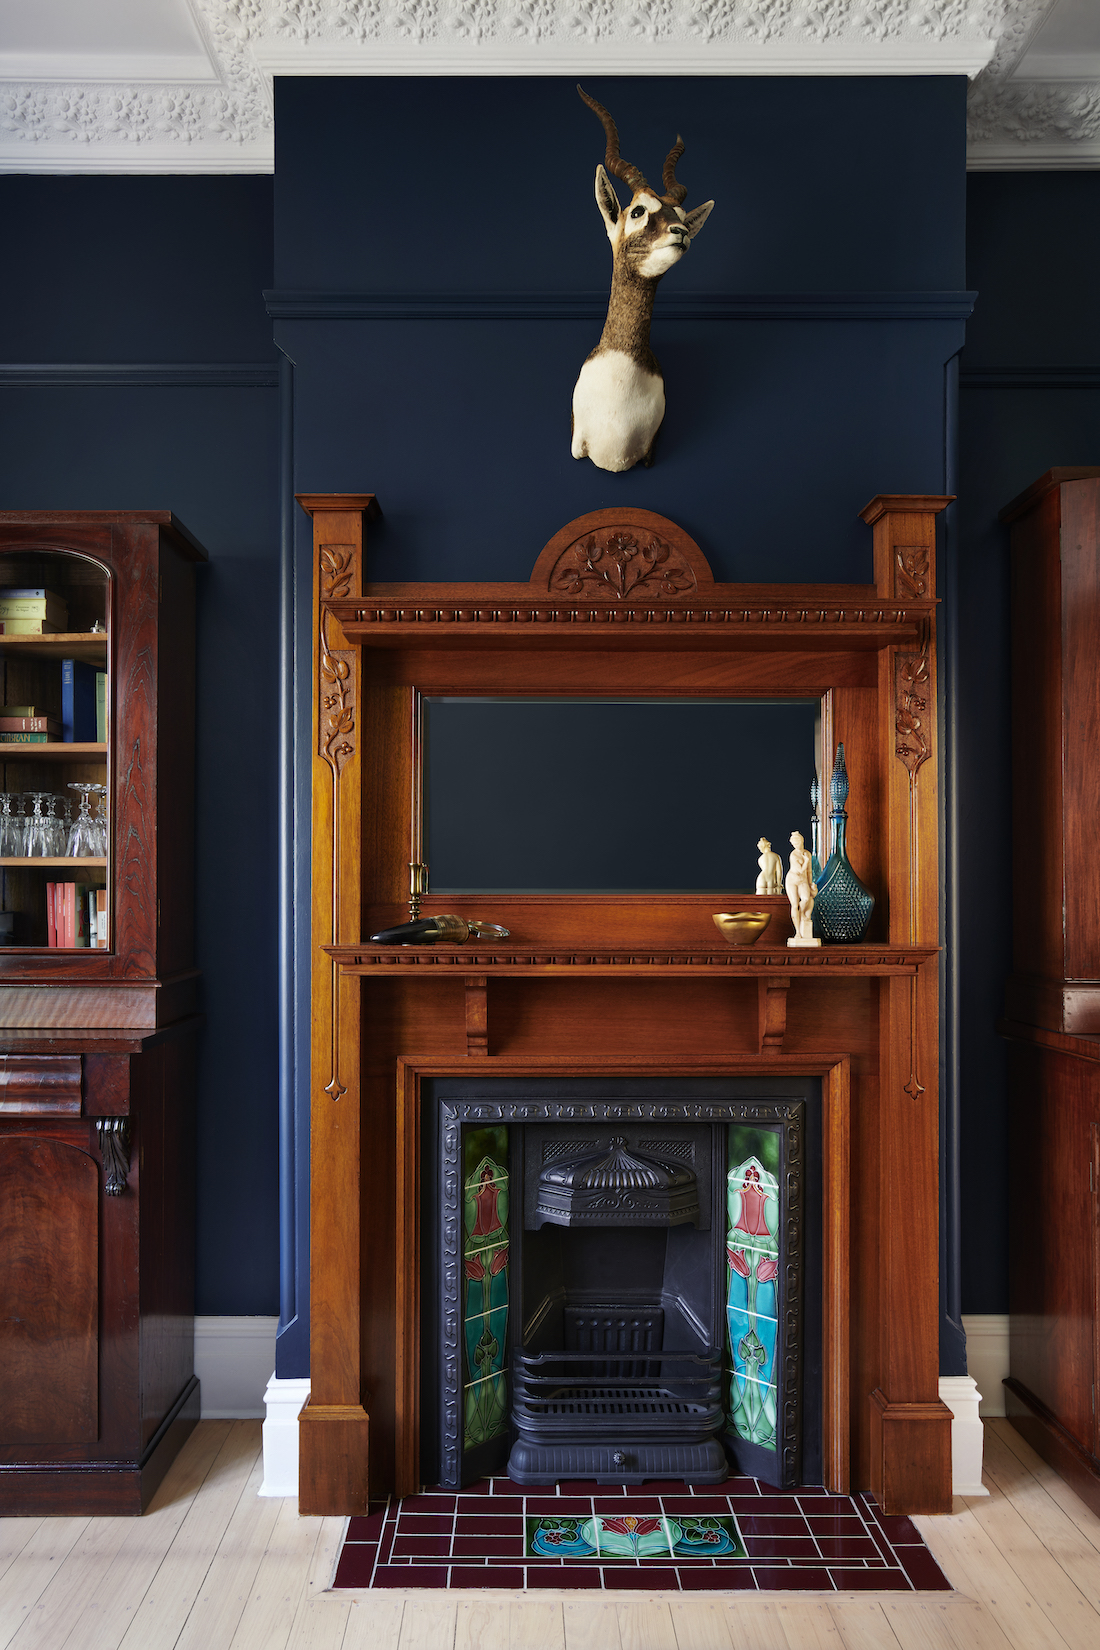 Original timber fireplace mantle in dark painted room by The Stylesmiths